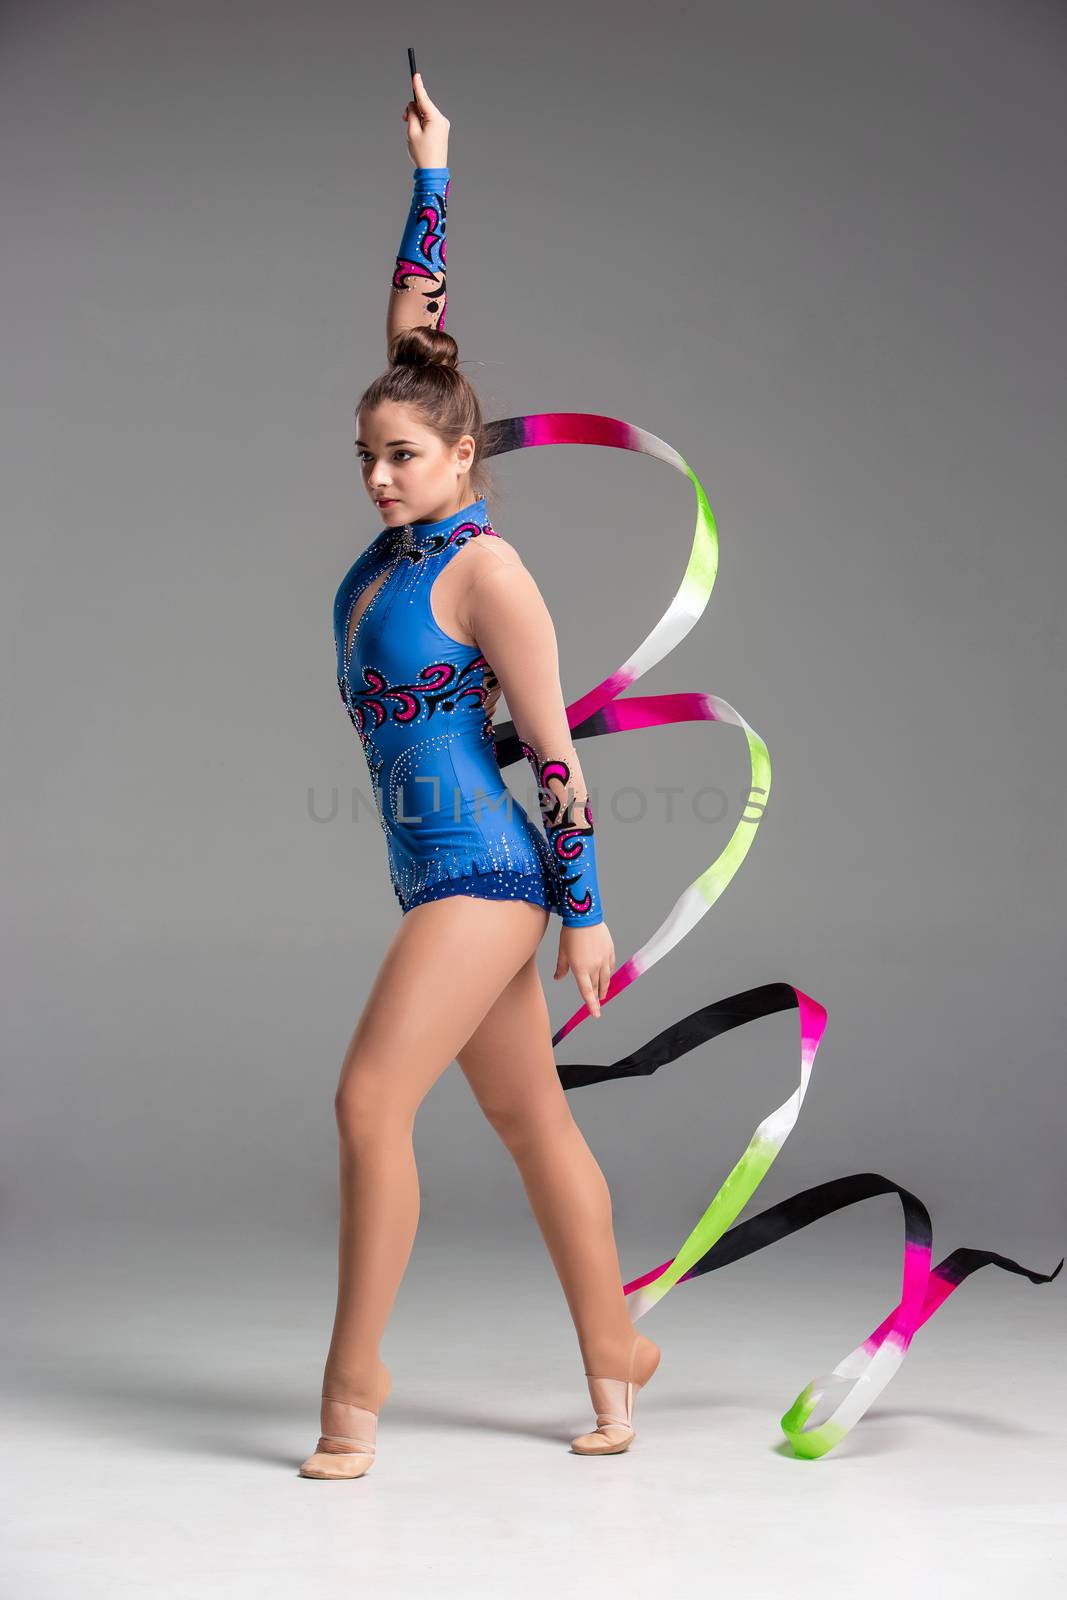 teenager doing gymnastics dance with colored ribbon on a gray background